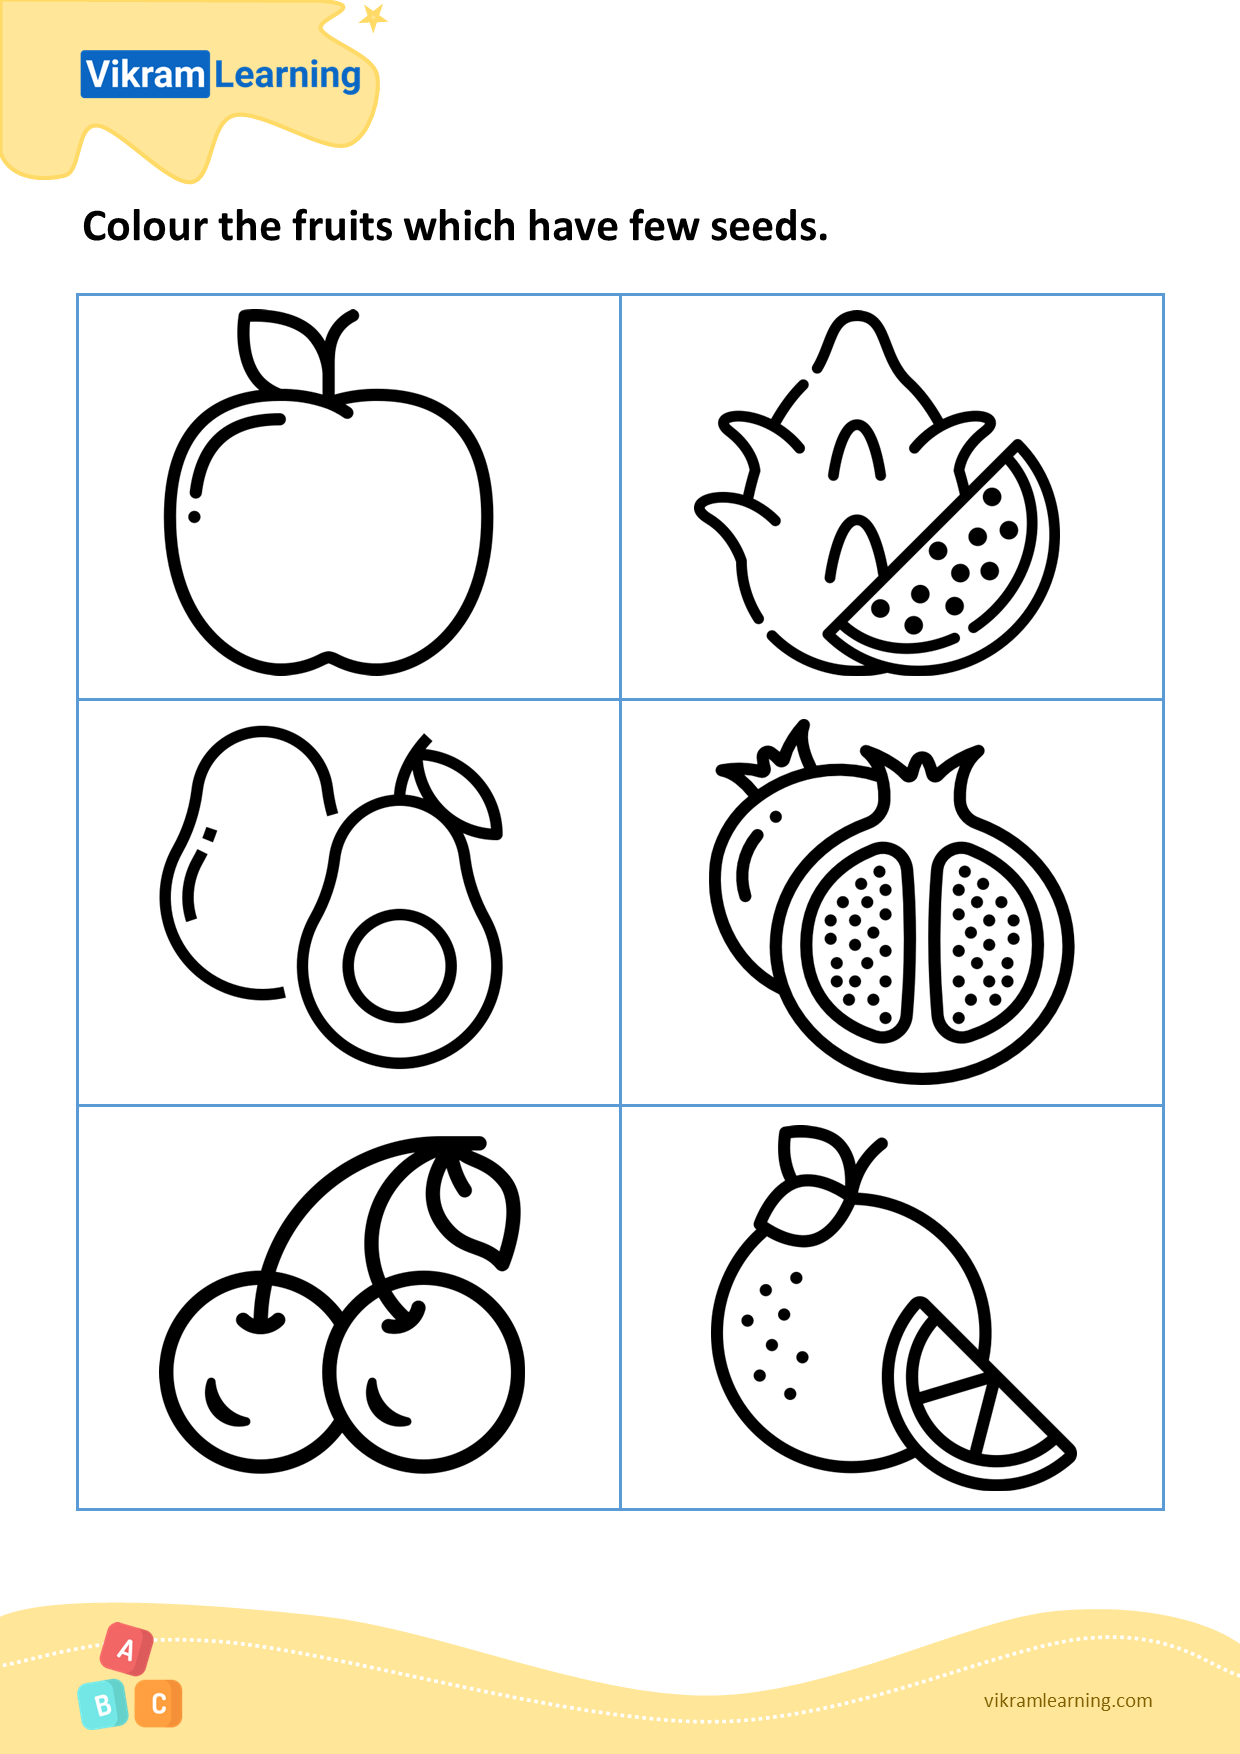 Download colour the fruits which have seeds - pattern 2 worksheets